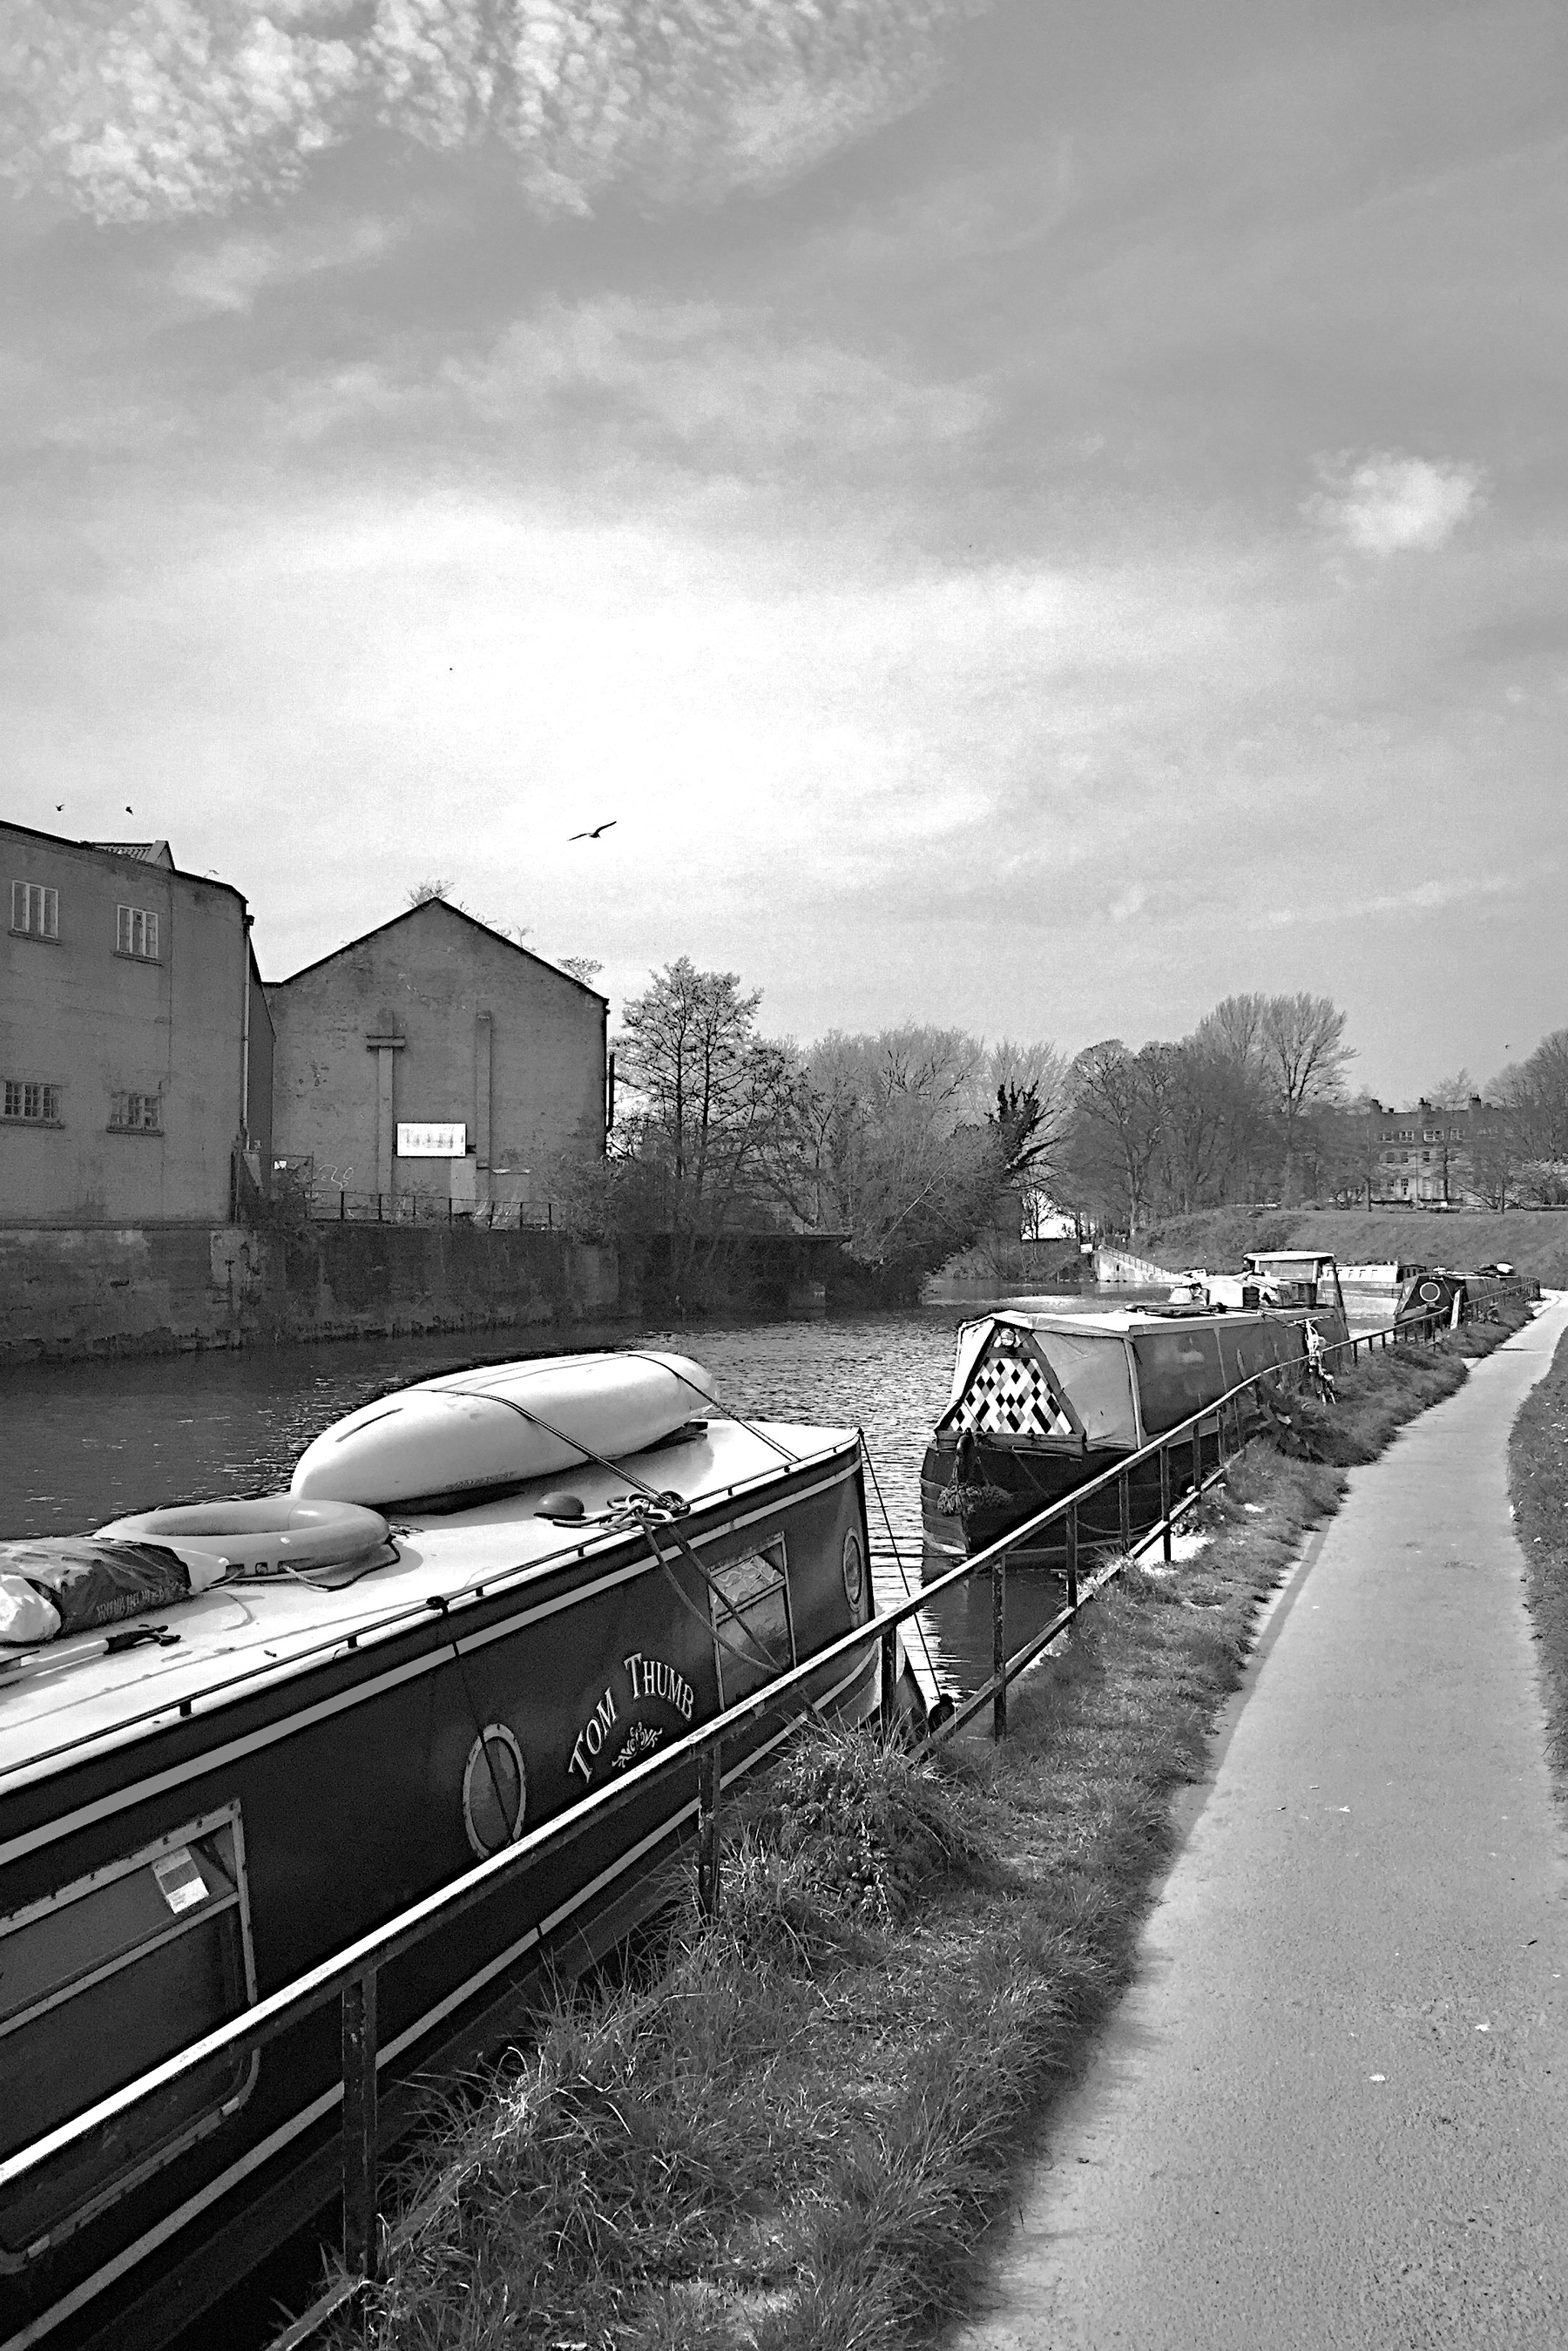 By the river that runs through Bath, UK. It’s black and white and a gull hovers over one of the houses